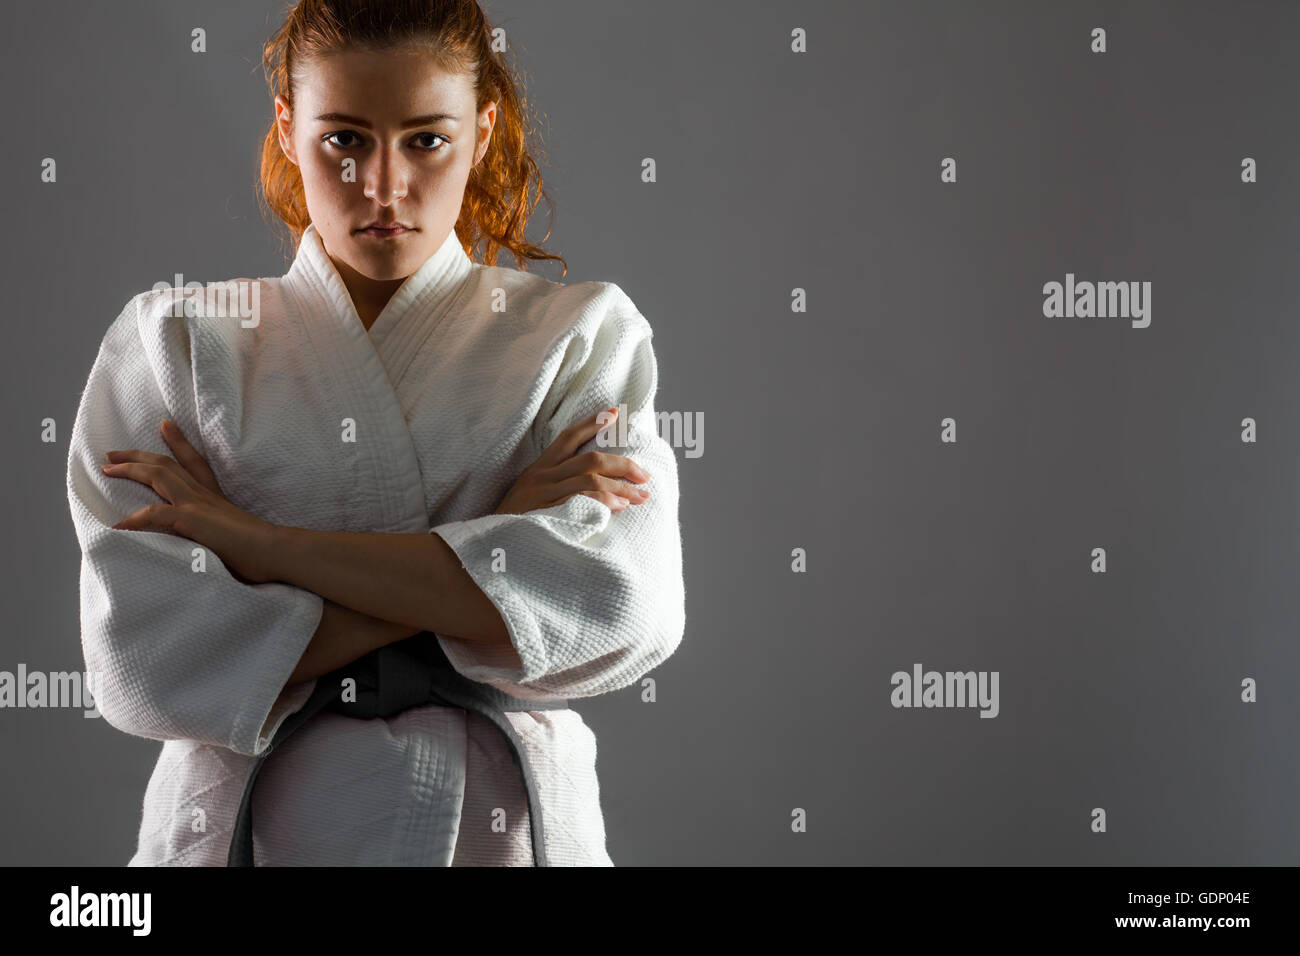 Confident Woman Wearing Karate Kimono with Crossed Arms Stock Photo